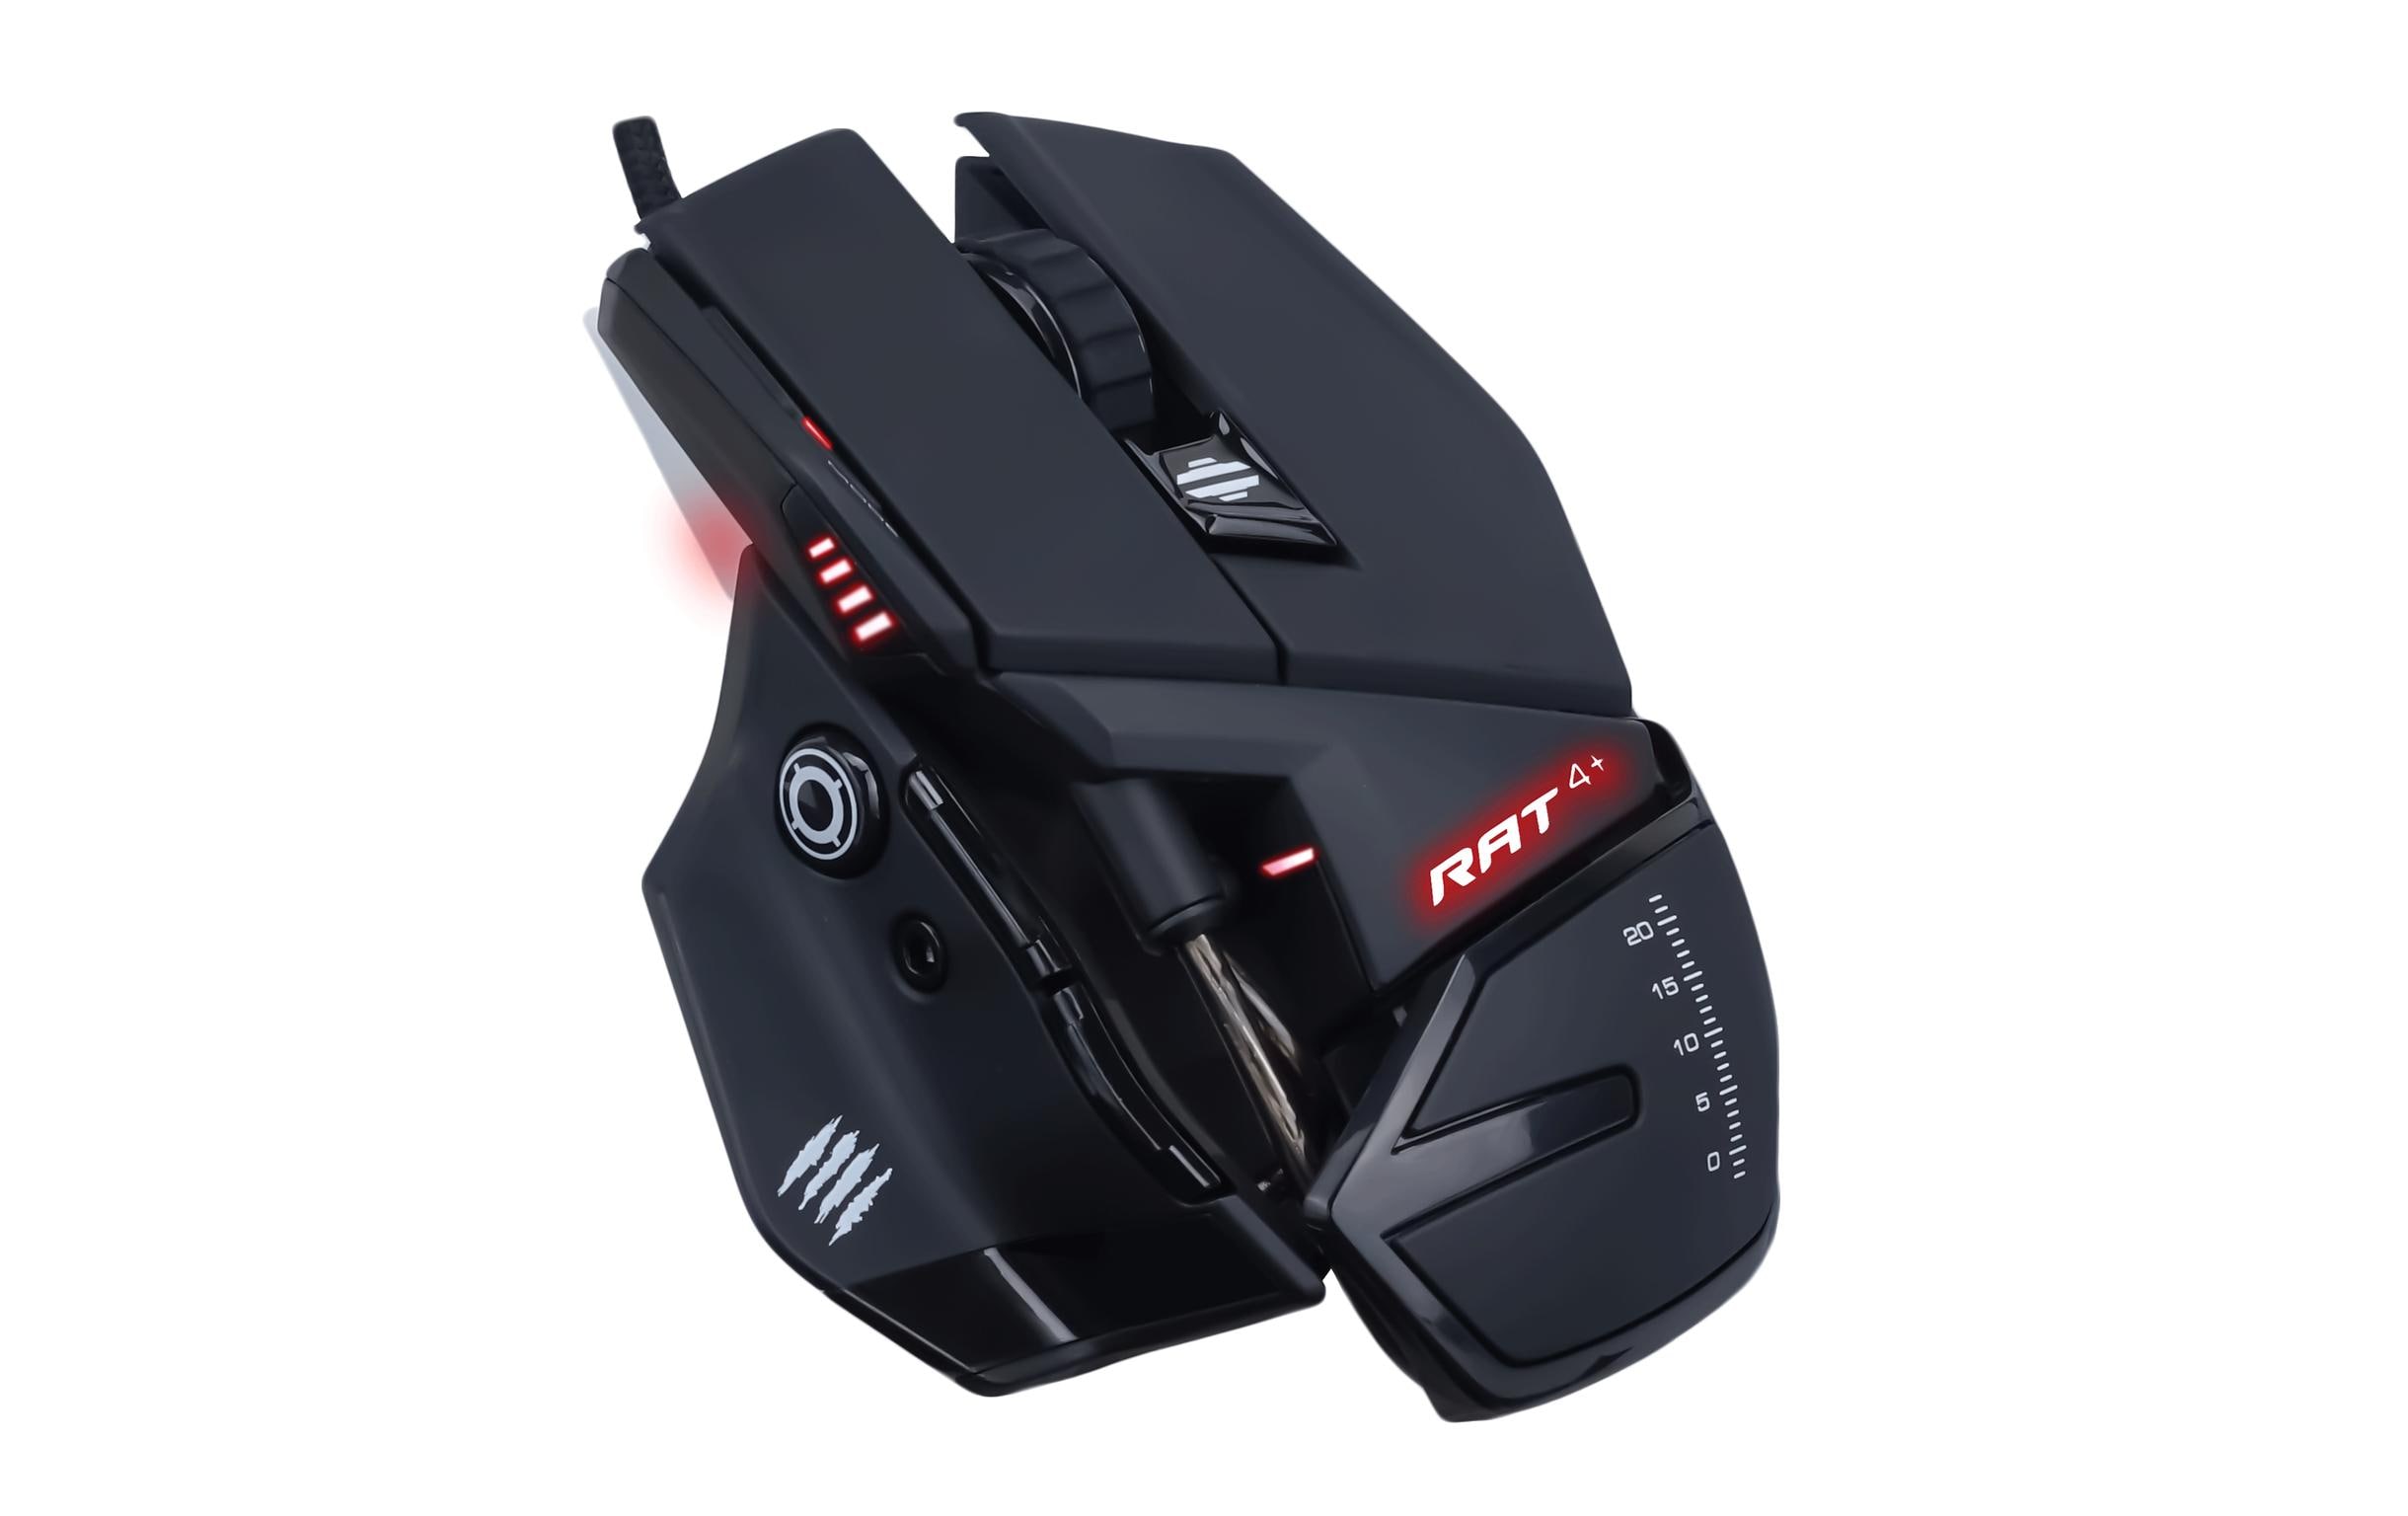 MadCatz Gaming-Maus R.A.T. 4+